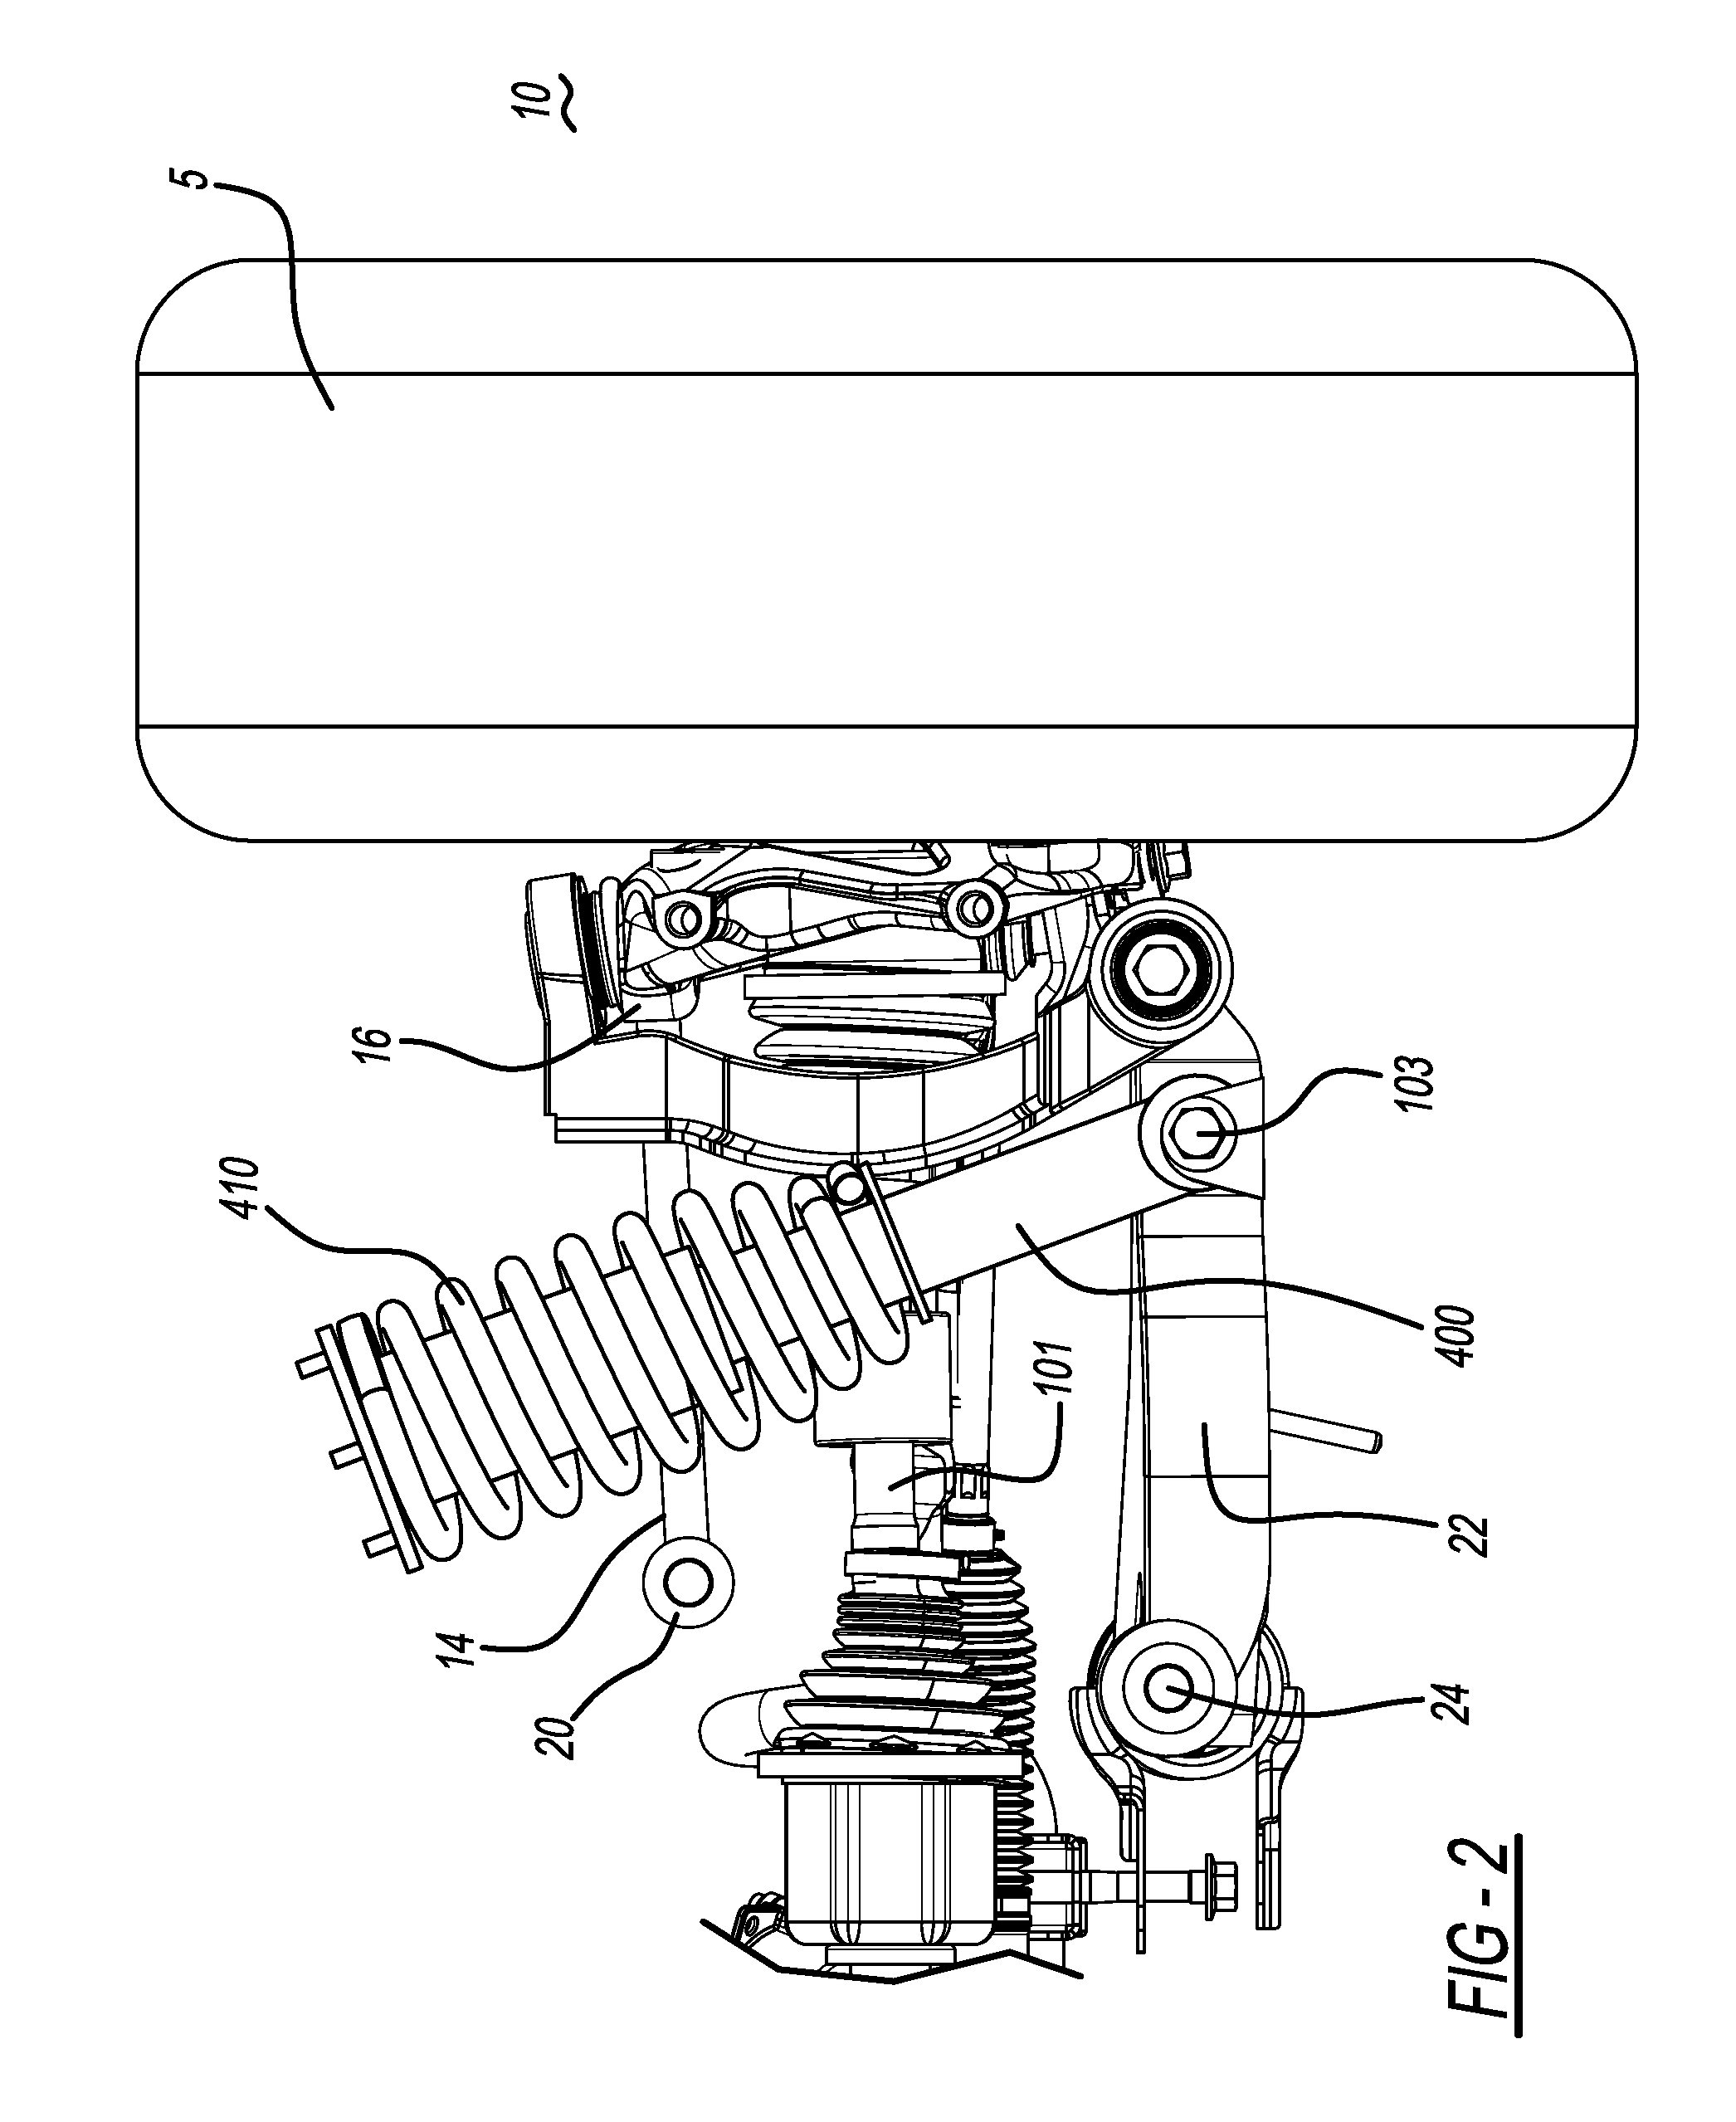 Front wheel suspension for a motor vehicle